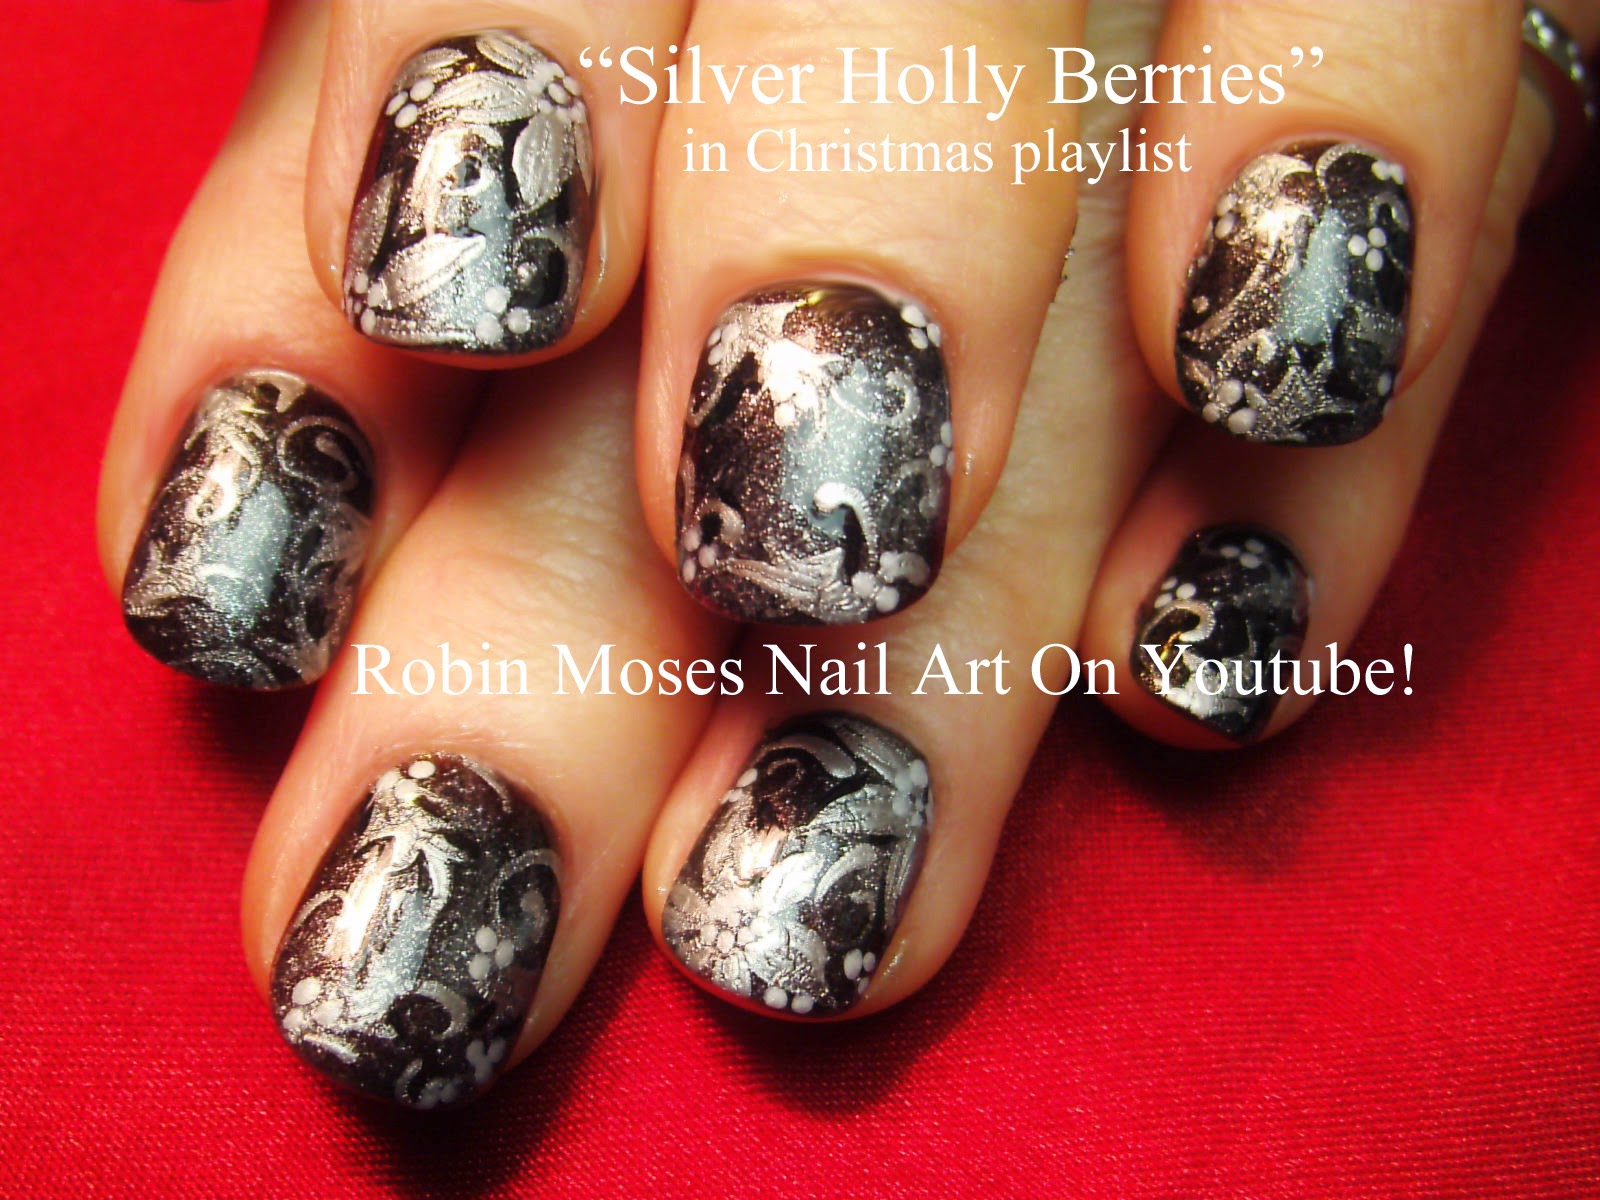 9. Festive Holly Nail Art for Christmas - wide 4